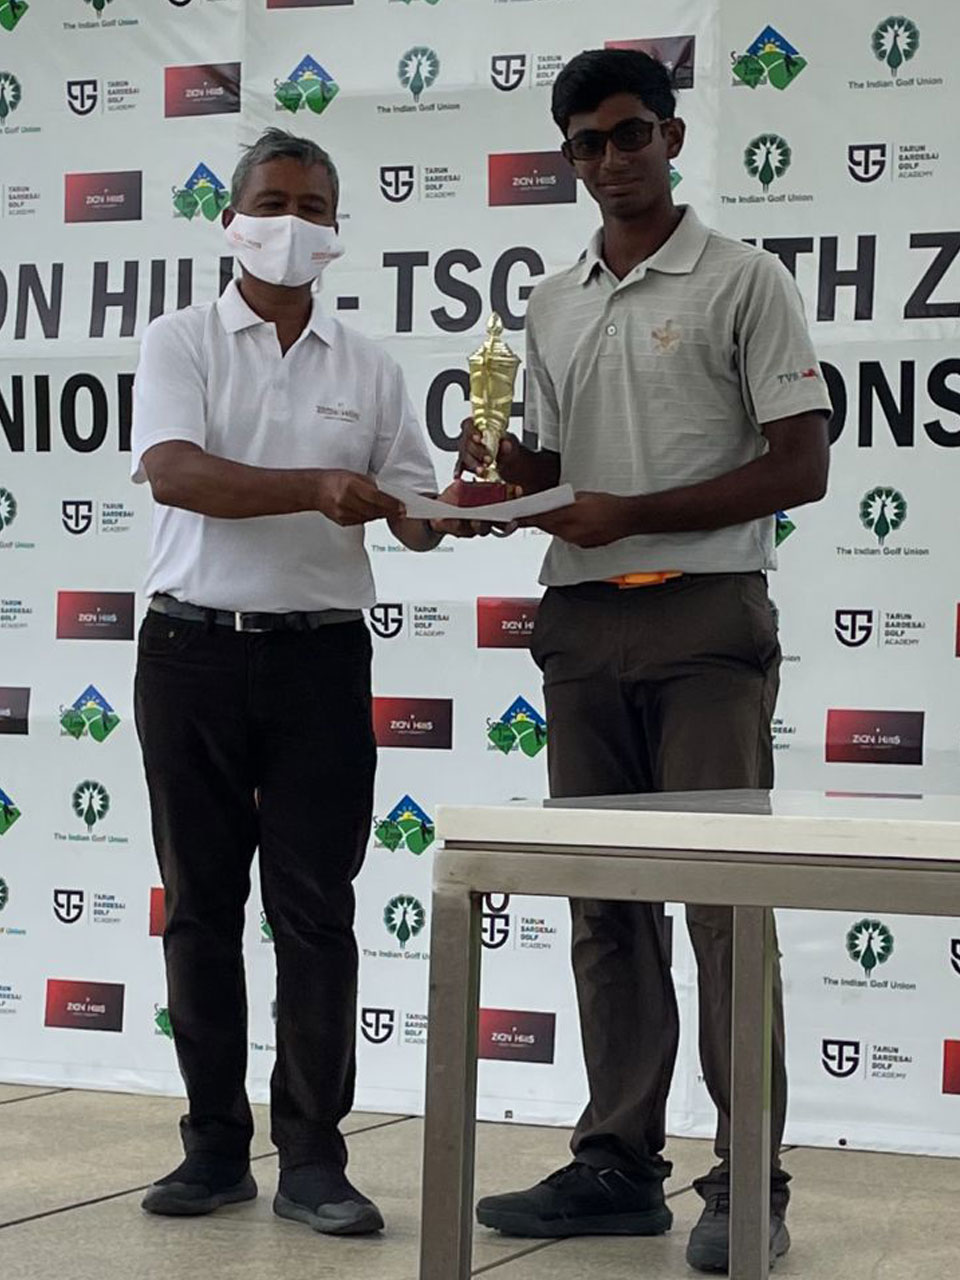 Shaurya Binu wins in Category A Boys at the Zion Hills